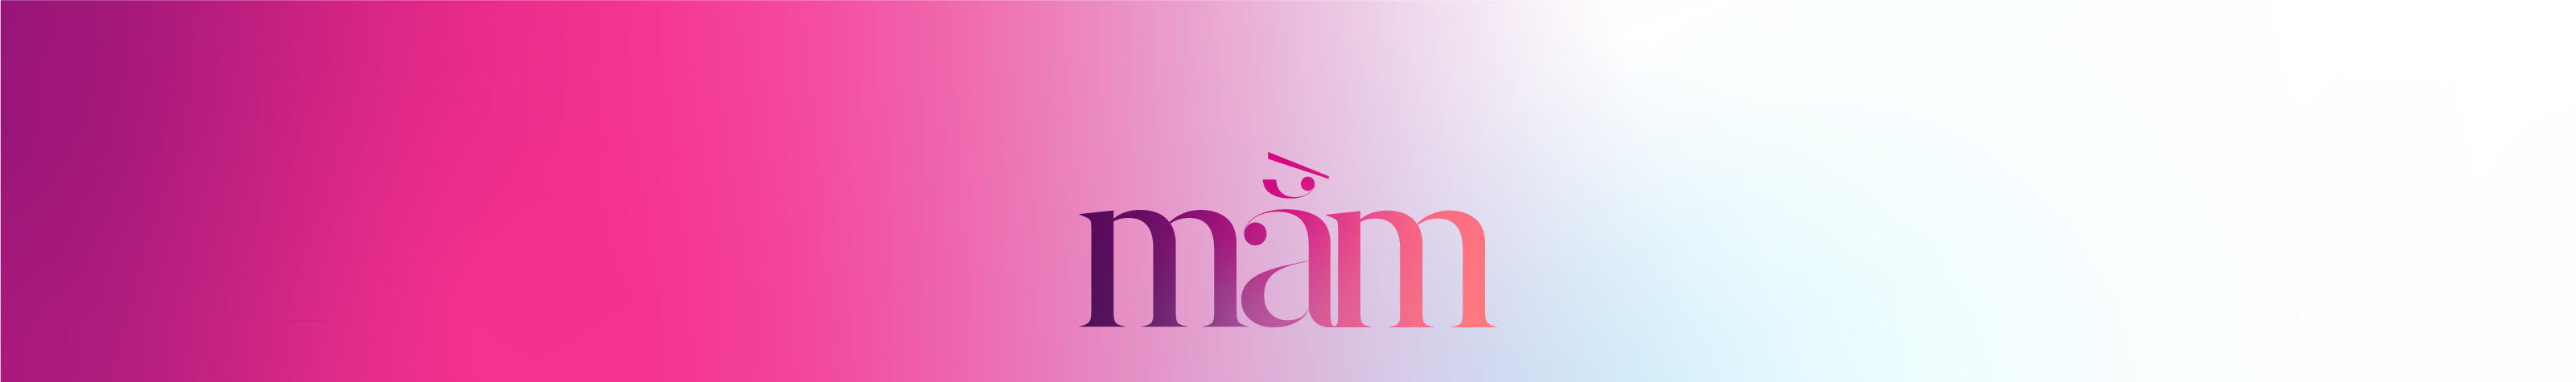 Mam Possible's profile banner